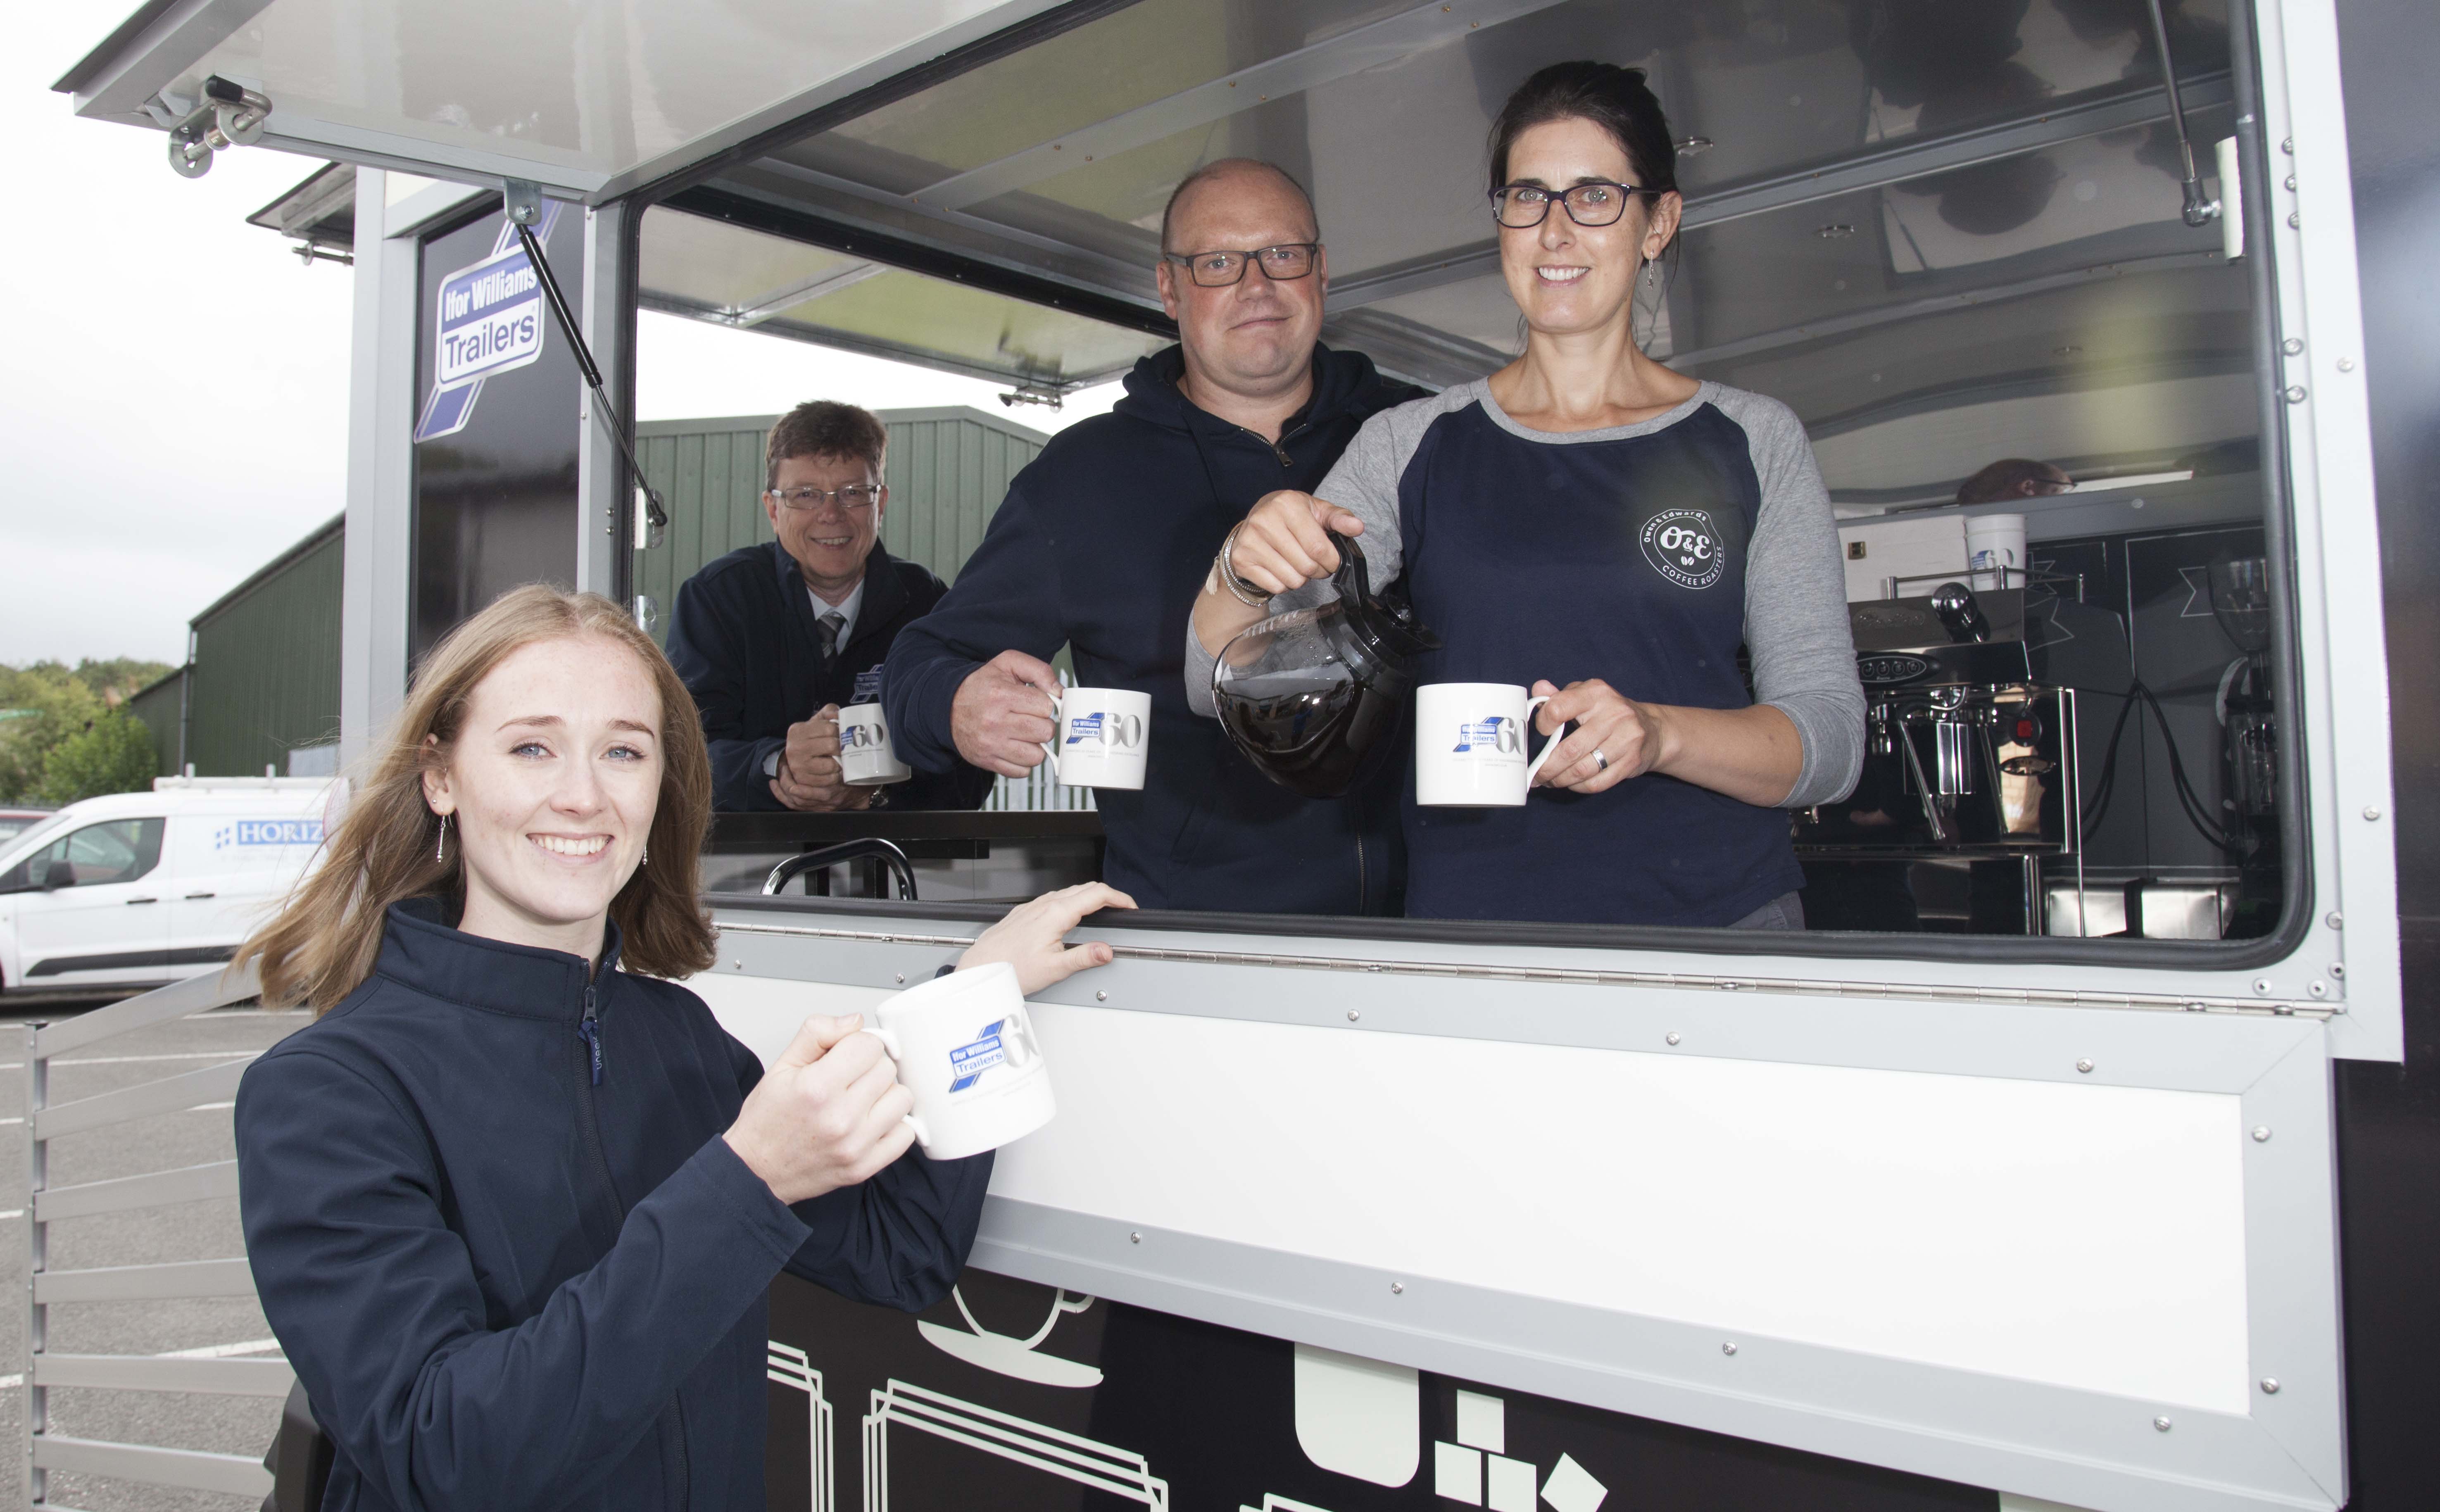 Trailer firm will be full of beans thanks to new anniversary coffee 